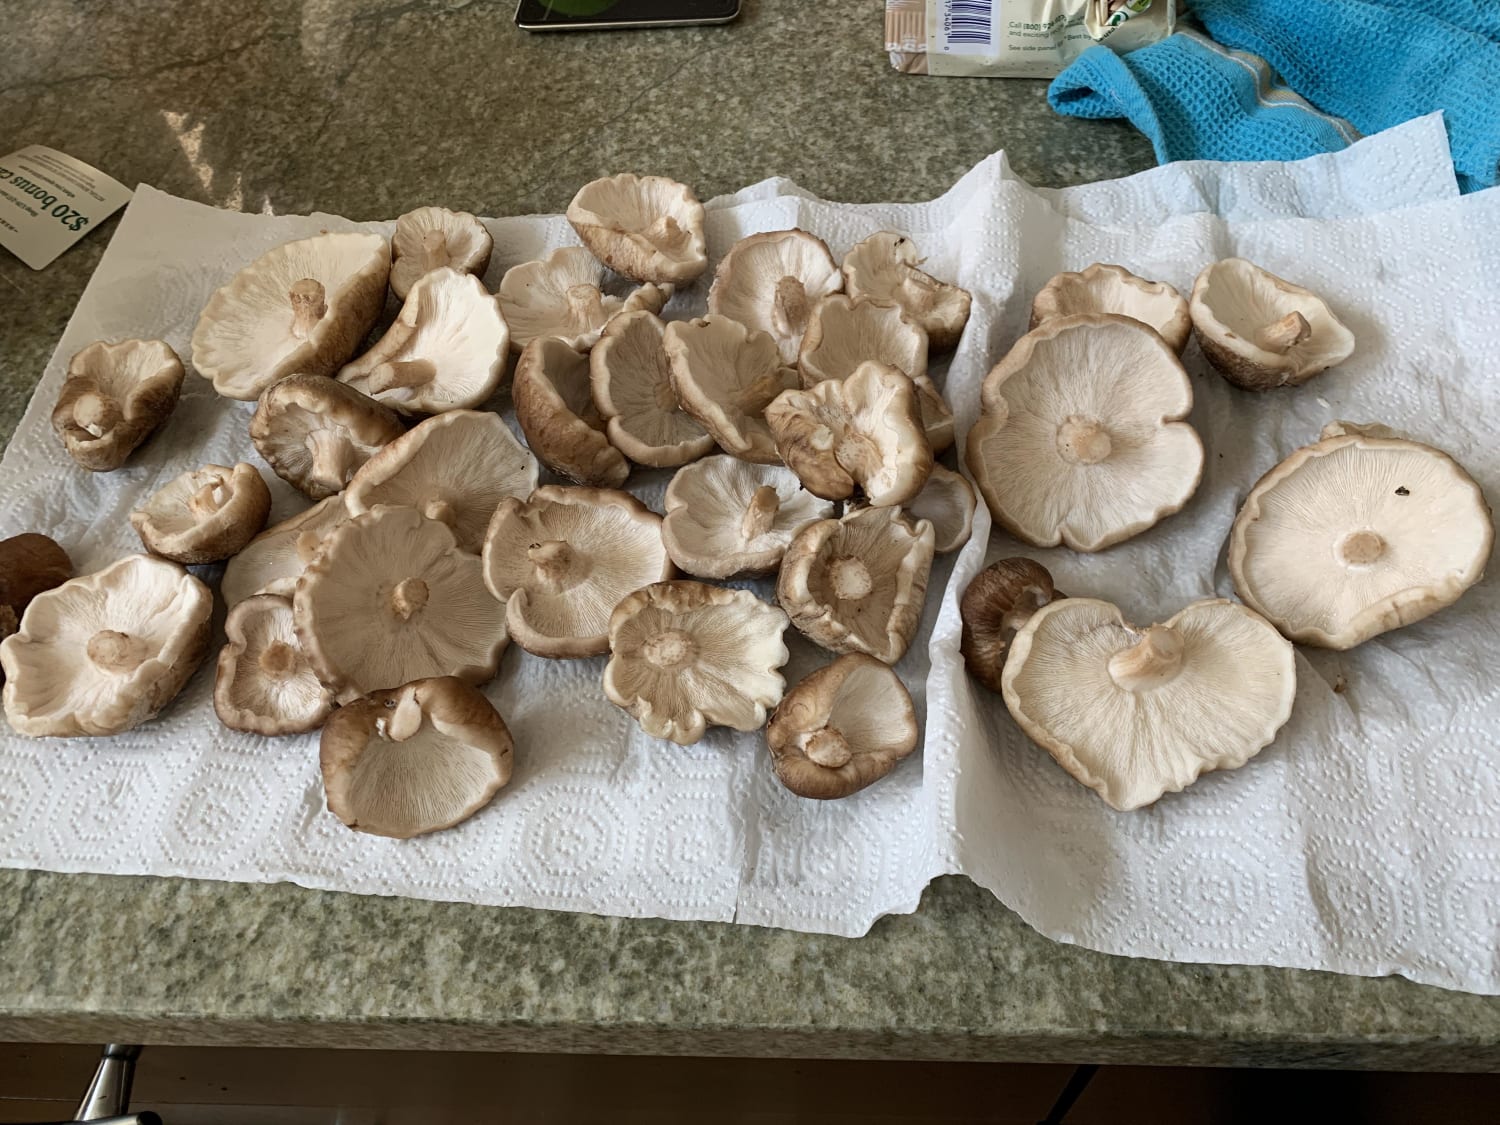 Looking for recipes that use shiitake mushrooms - here's our first harvest! I prefer them as part of larger recipe, not by themselves.